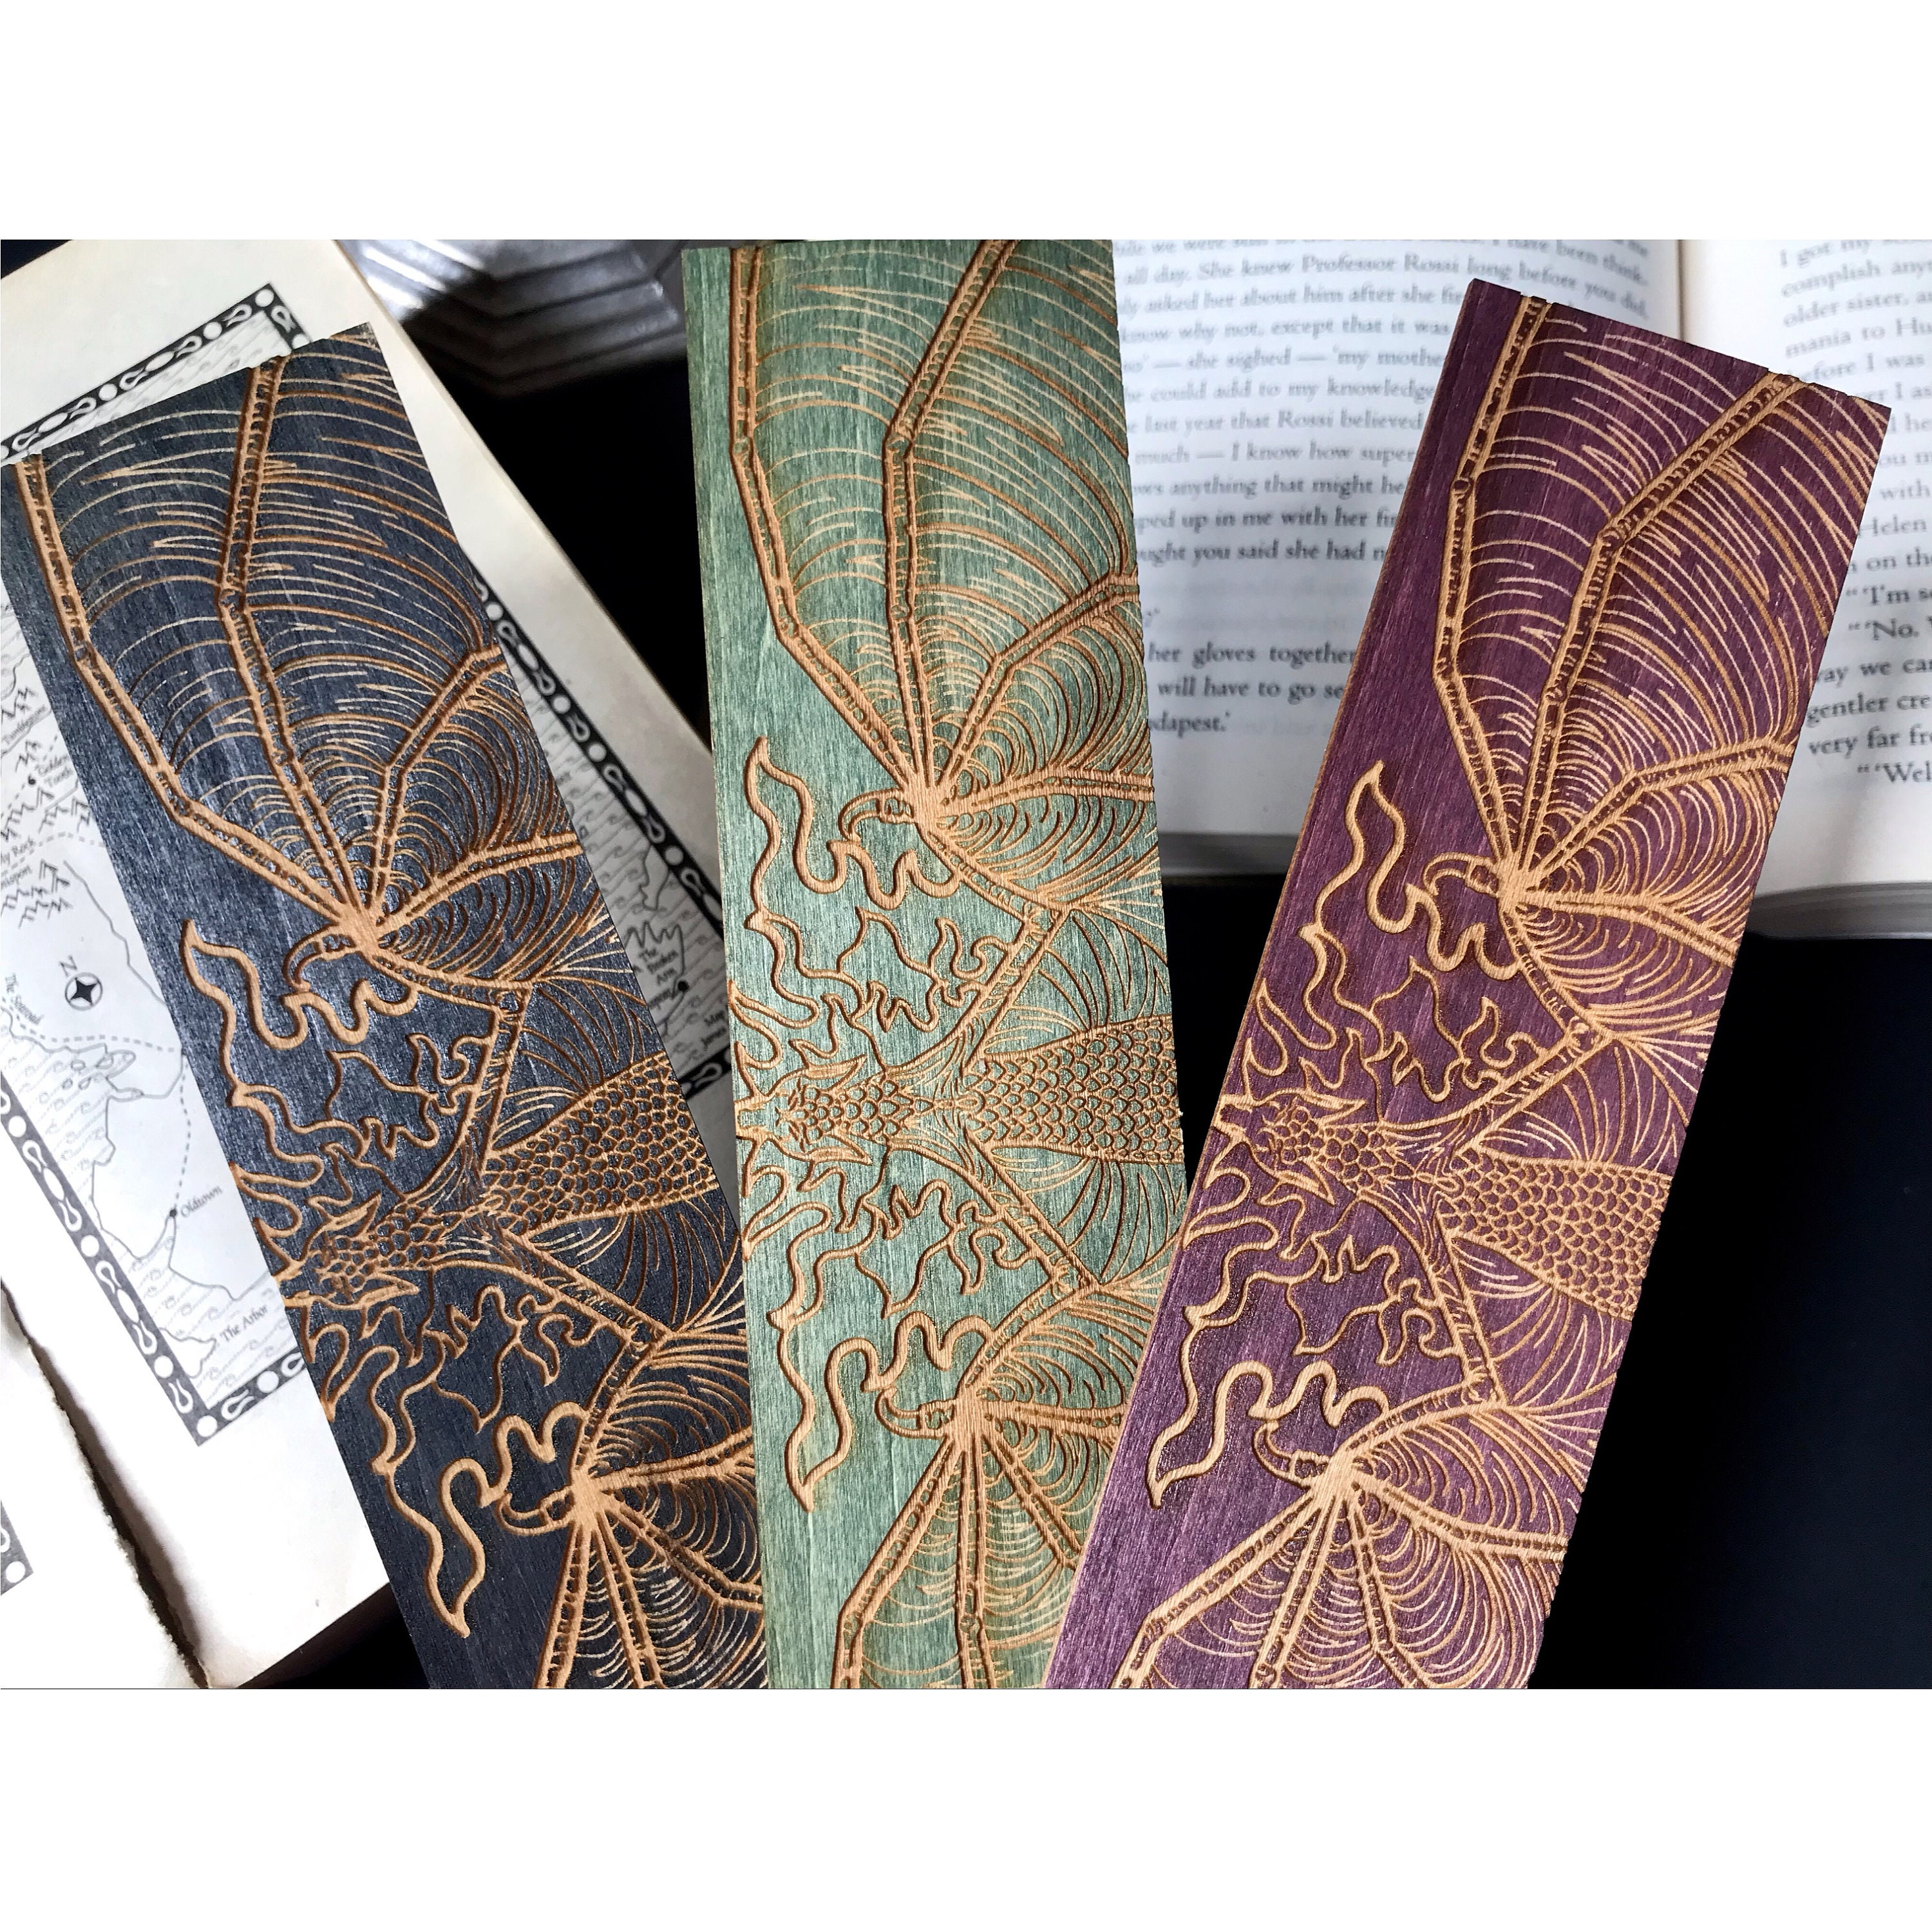 My dad started making these Dune inspired wooden bookmarks. He